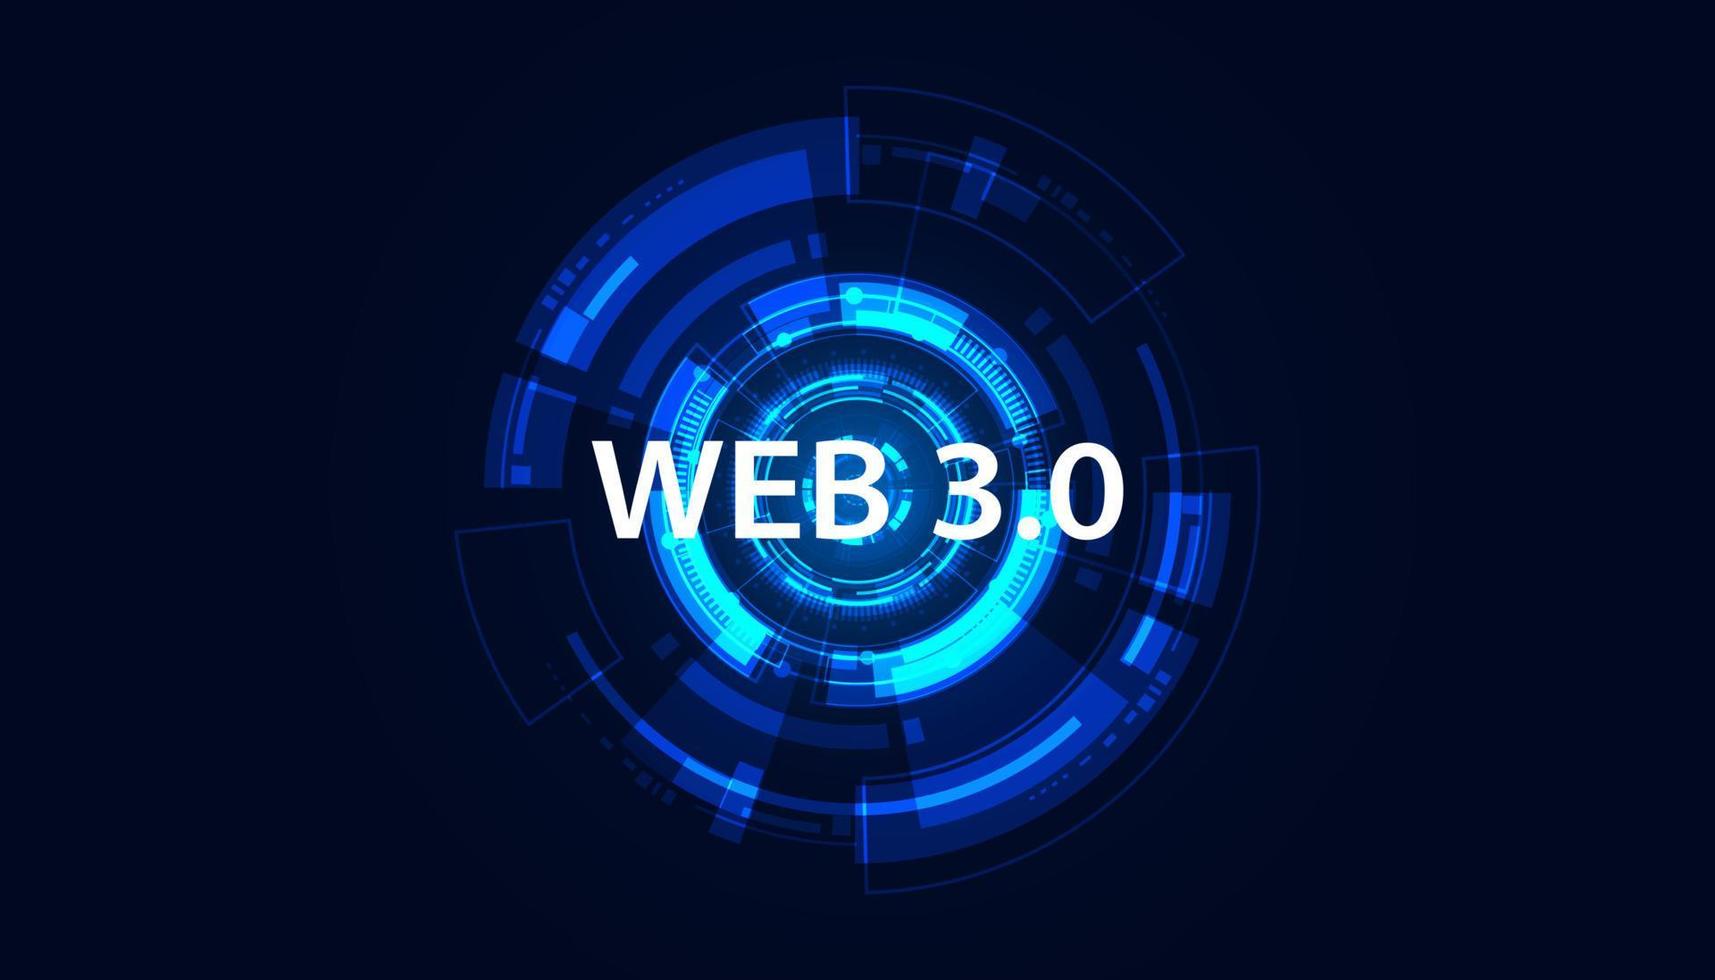 Abstract Technology Circle Digital Futuristic Concept Web 3.0 Semantic Web and Artificial Intelligence Accessing network services personal information Working on a network Decentralized and Blockchain vector